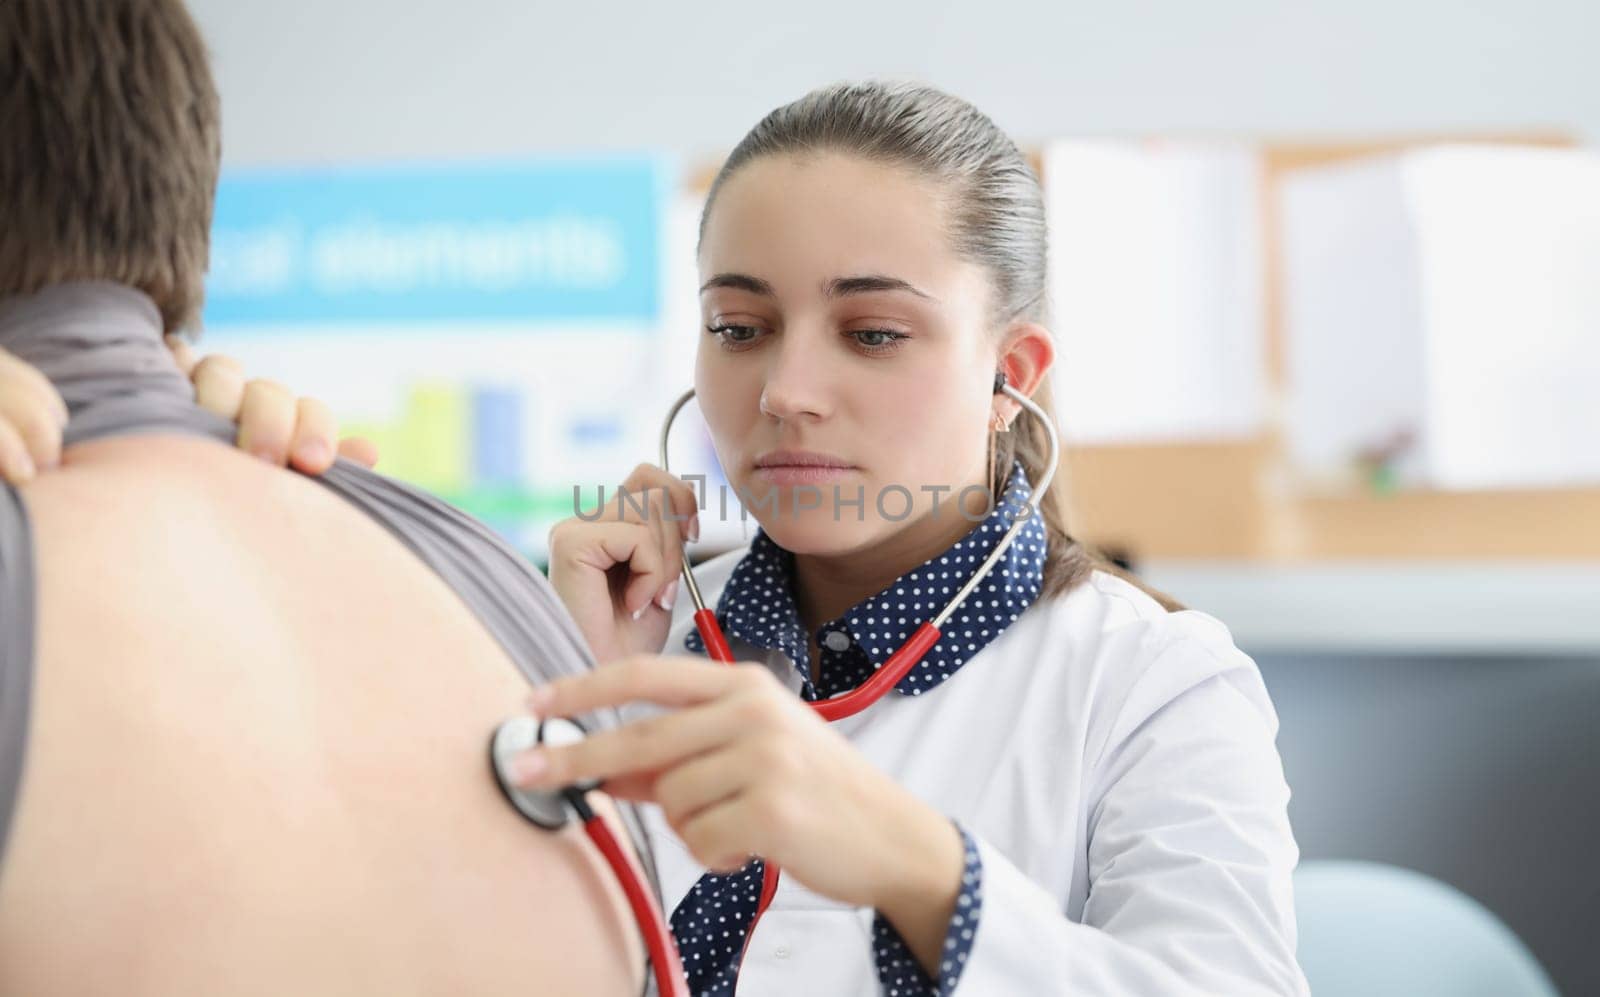 Woman pulmonologist listening to lungs of patient with stethoscope in clinic. Diagnostics and treatment of pneumonia concept